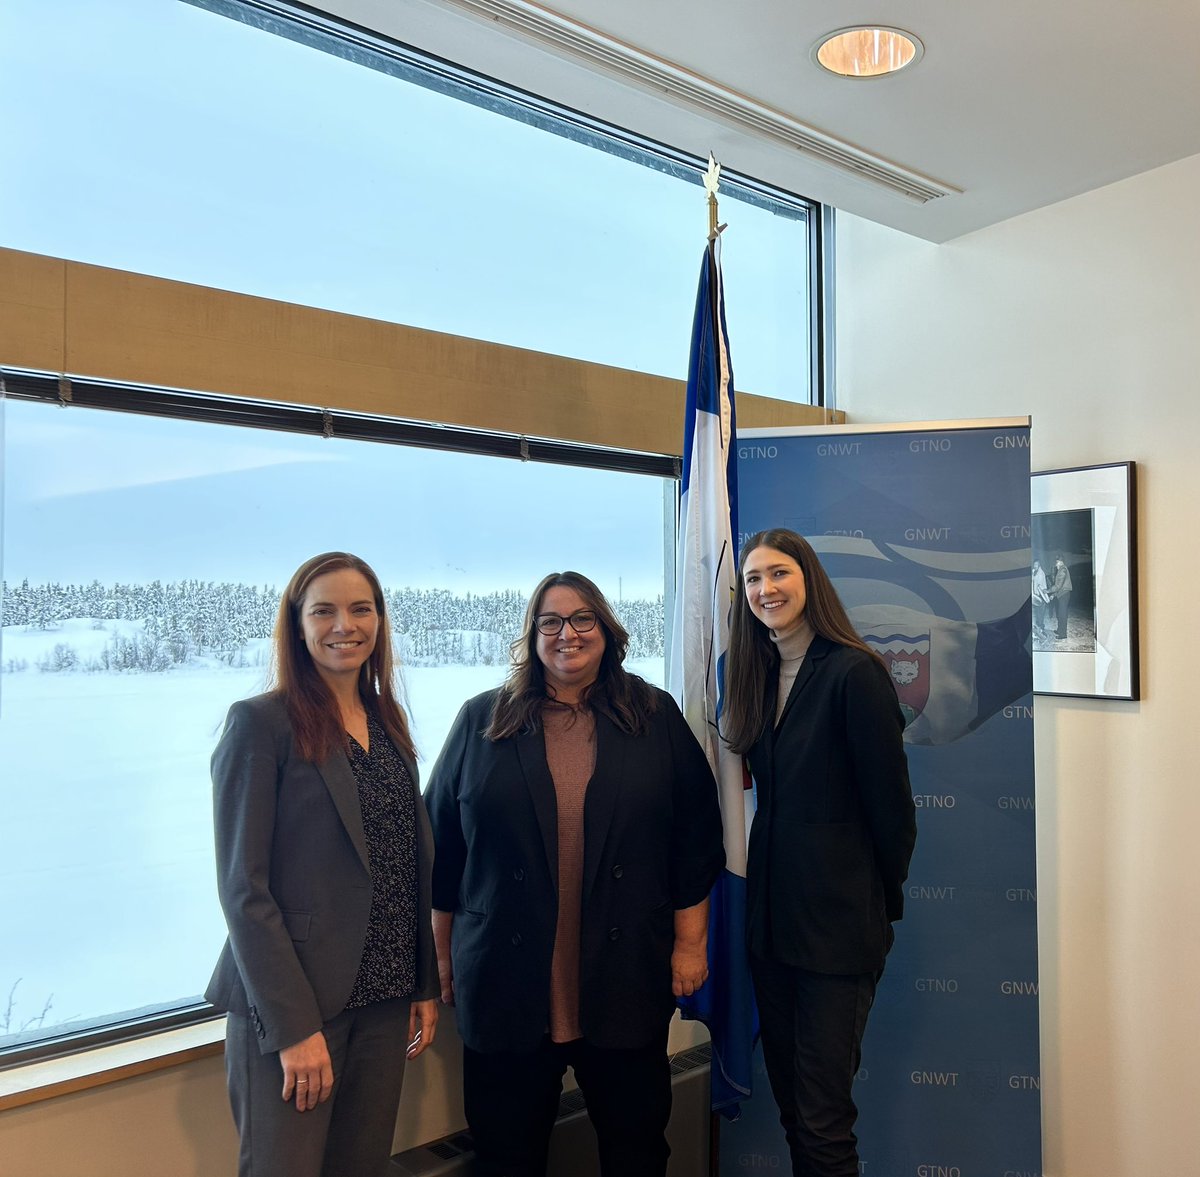 This morning, CFIB was pleased to meet with NWT Deputy Premier and Minister of Finance @CWawzonek at the legislative assembly in Yellowknife. We appreciated the opportunity to discuss the challenges small business owners are facing. Thanks for your time! #NWTPoli #GNWT